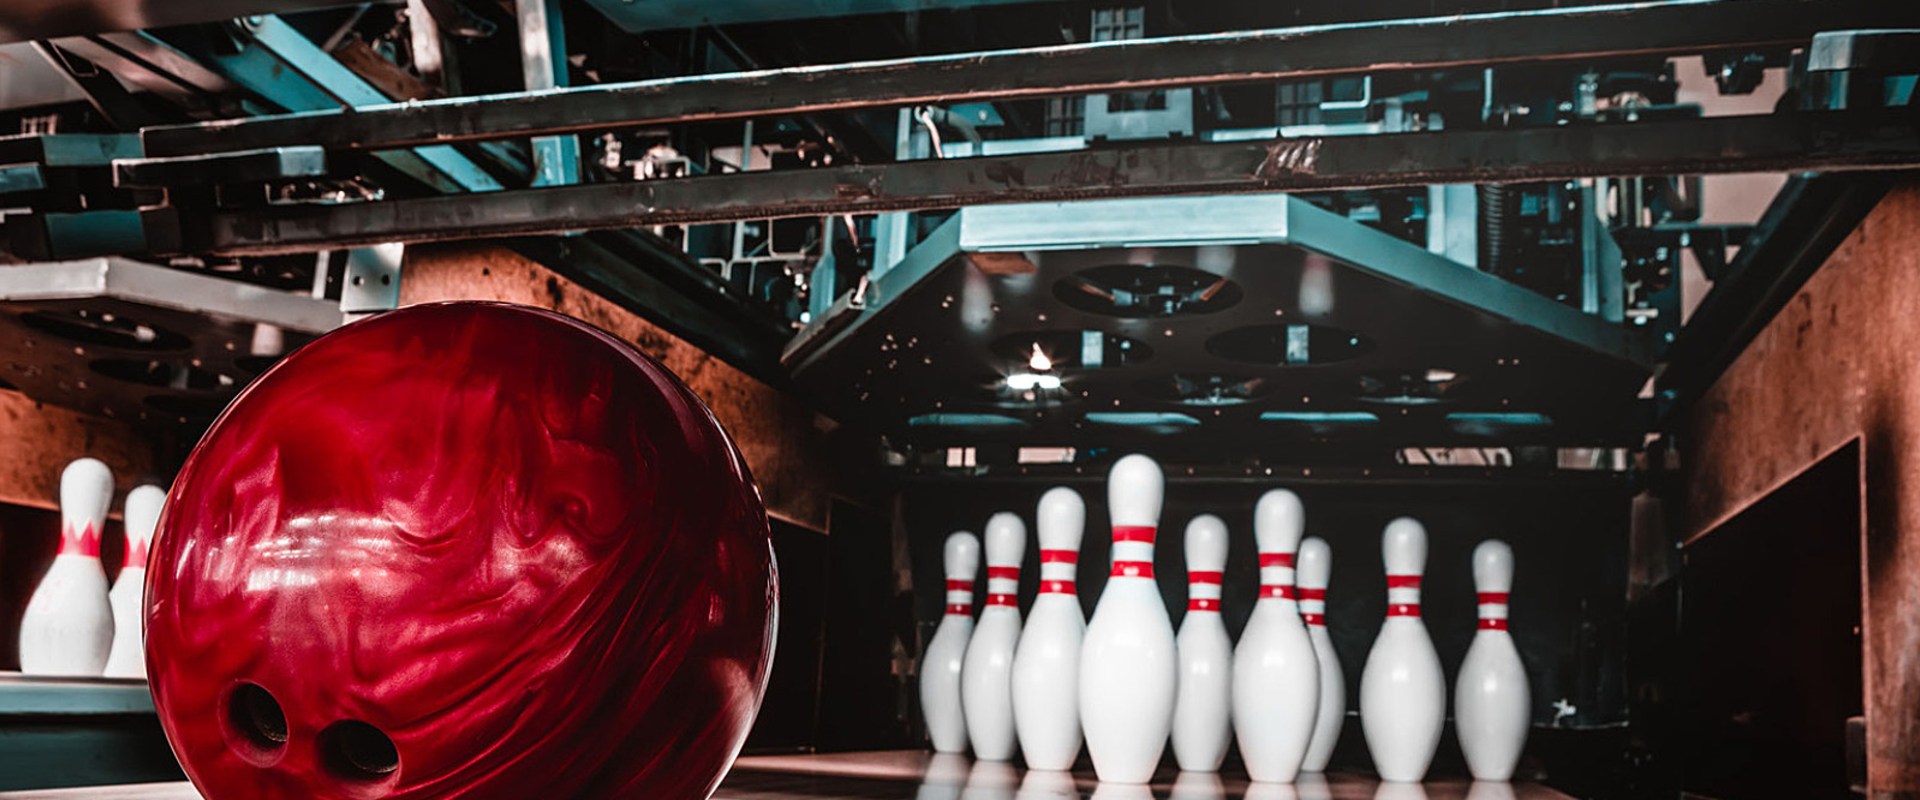 Bowling Alleys in Suffolk County, NY: Enjoy Fun Activities and Amenities